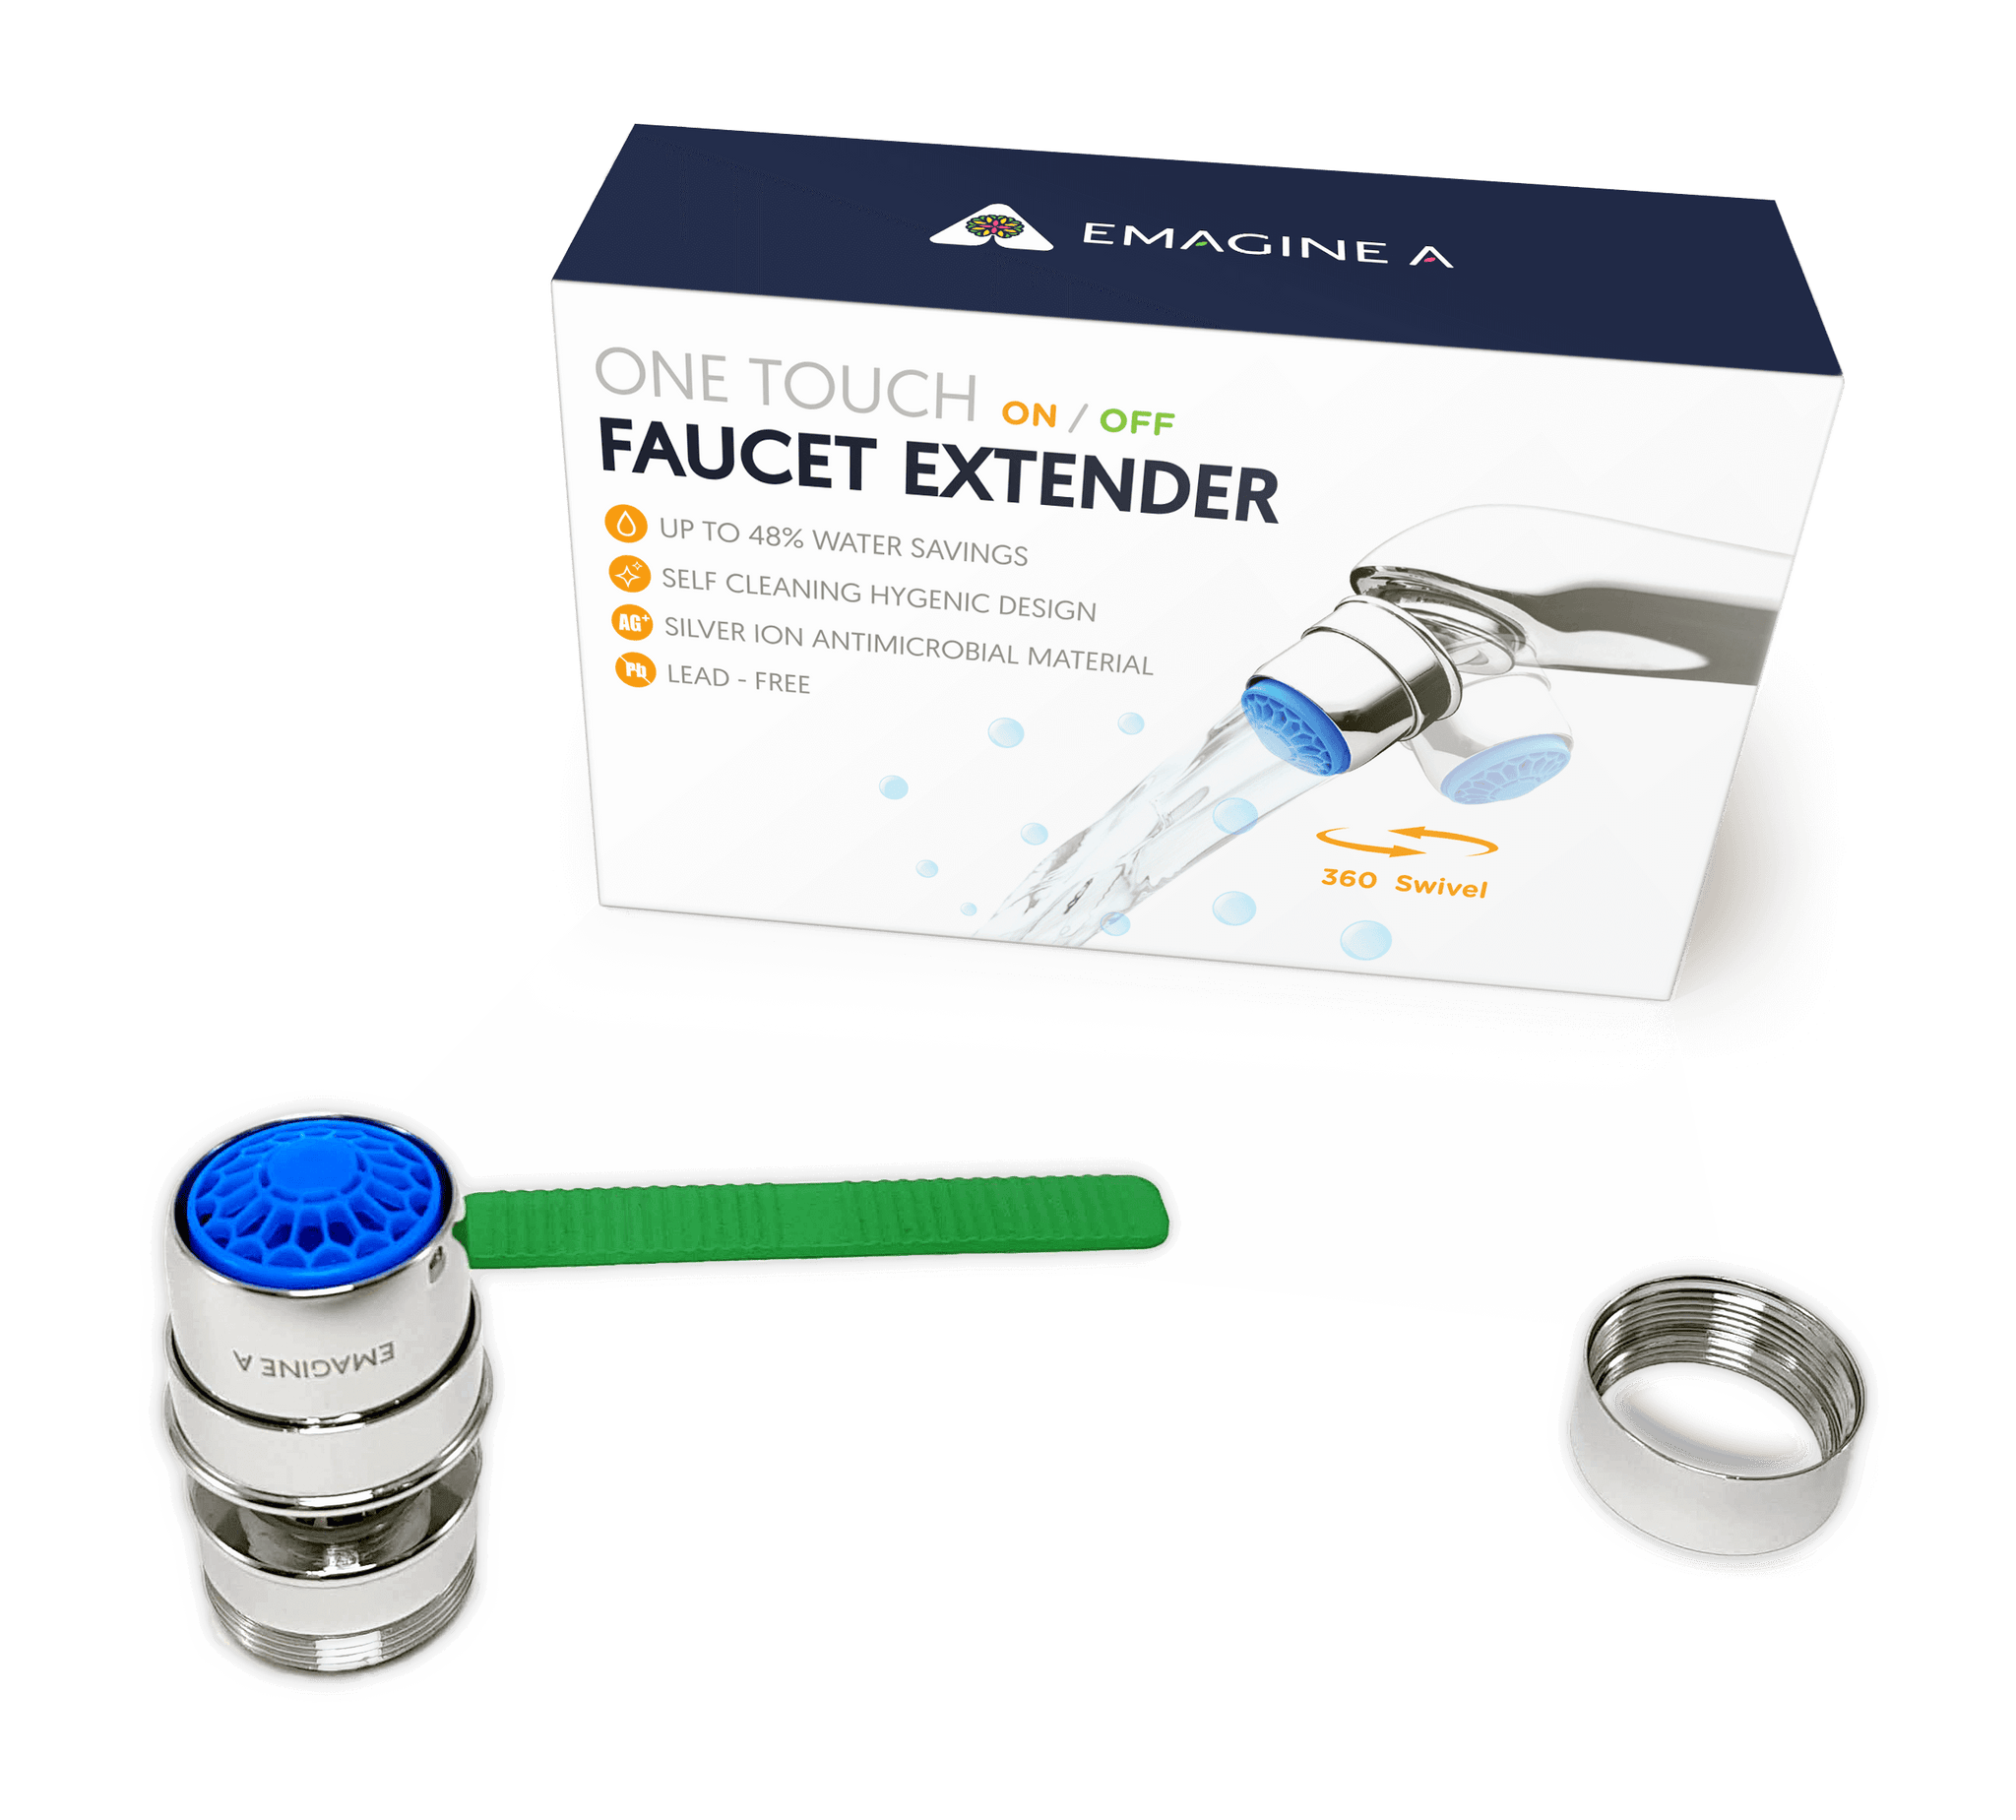 One Touch Faucet Extender - Basic